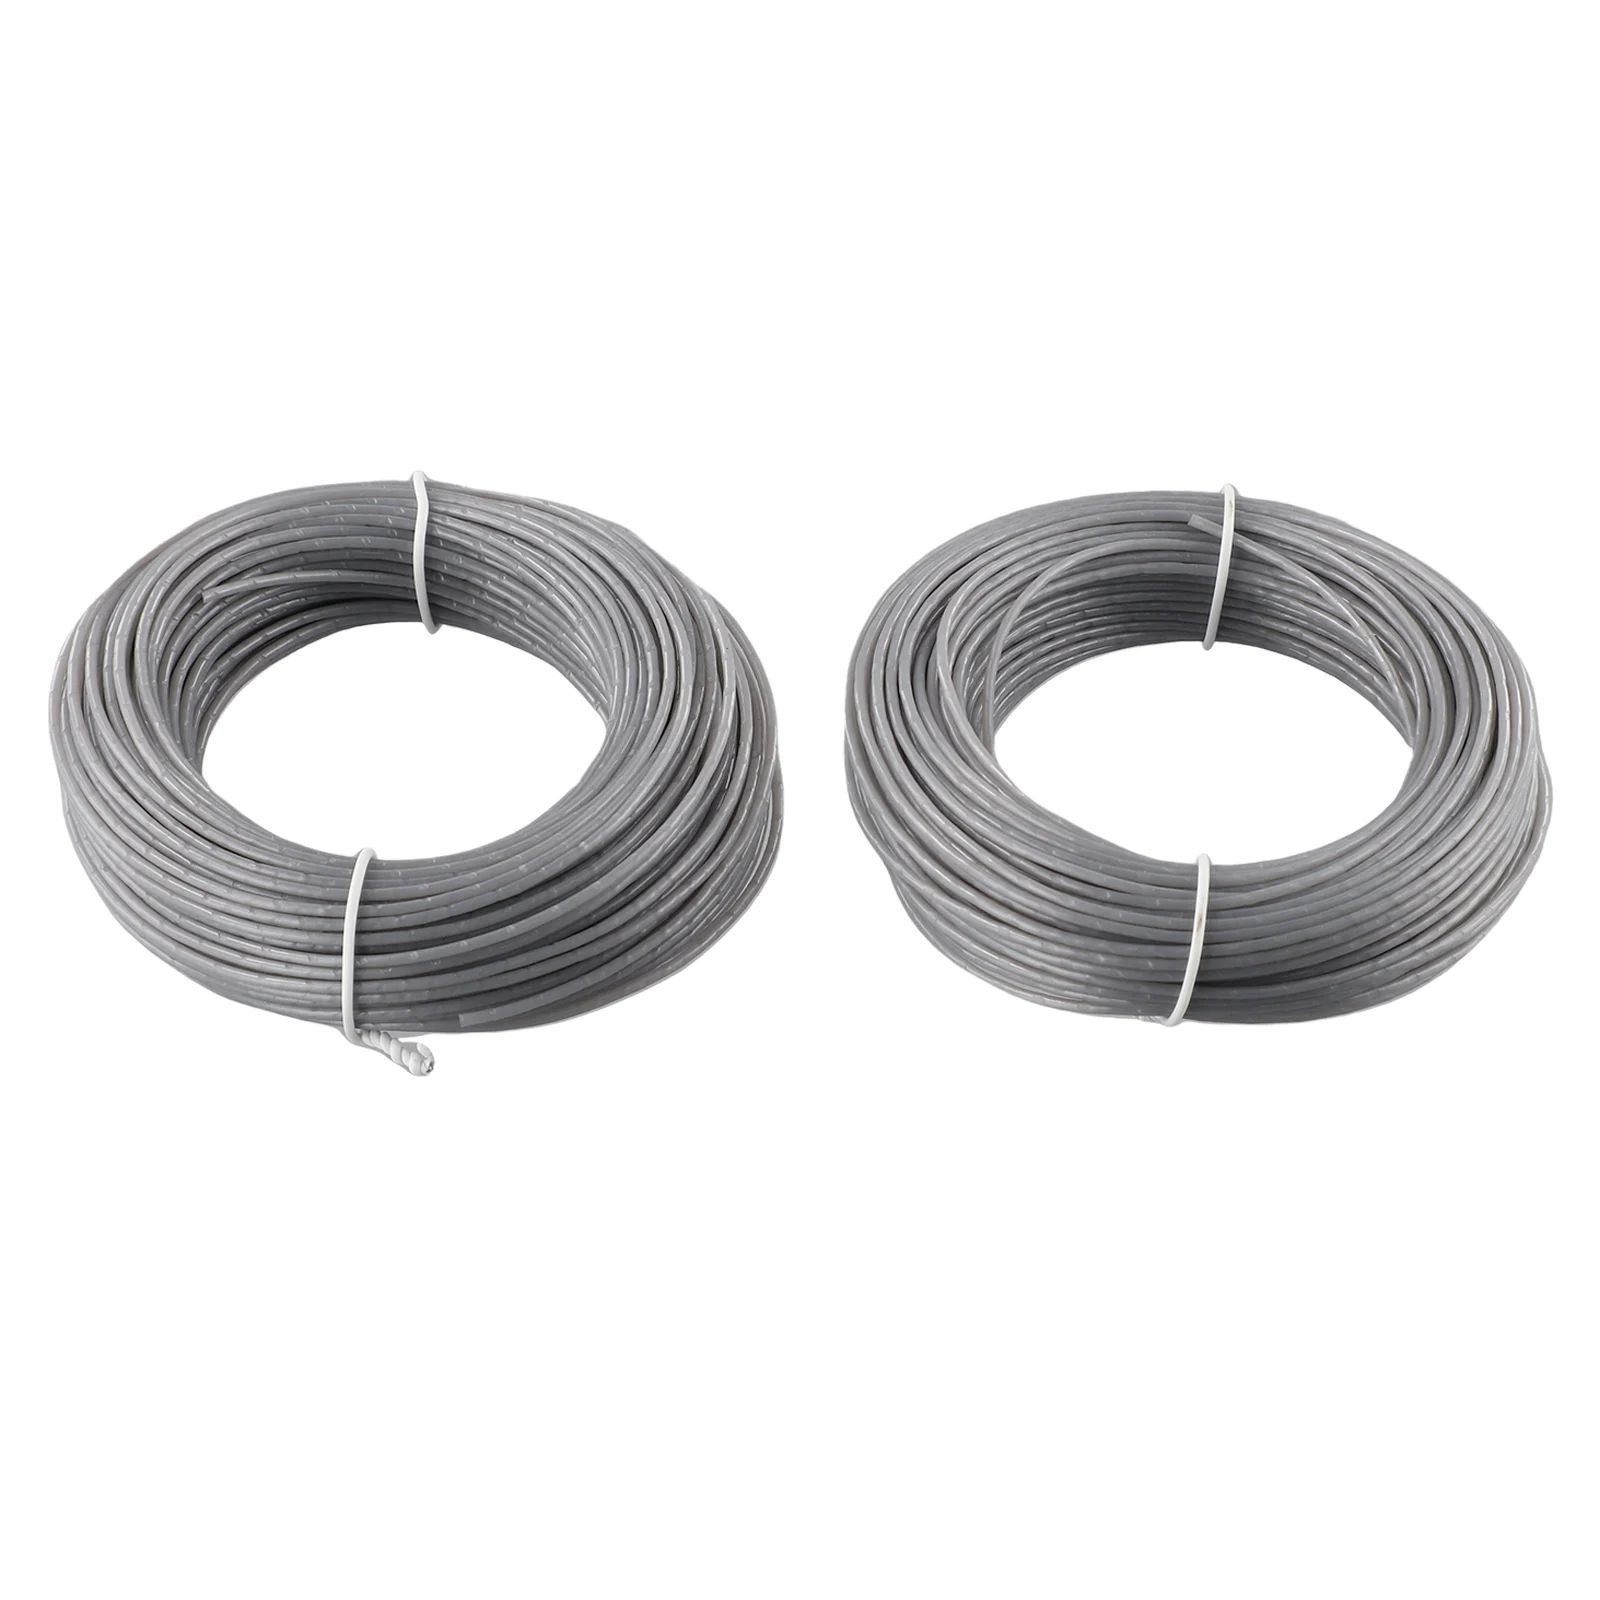 

2pcs 24m Grass Trimmer Line Brushcutter Rope Lawn Mower Cord For EasyGrassCut 18/18-230/ 18-260/18-26 / EasyGrassCut 23/26